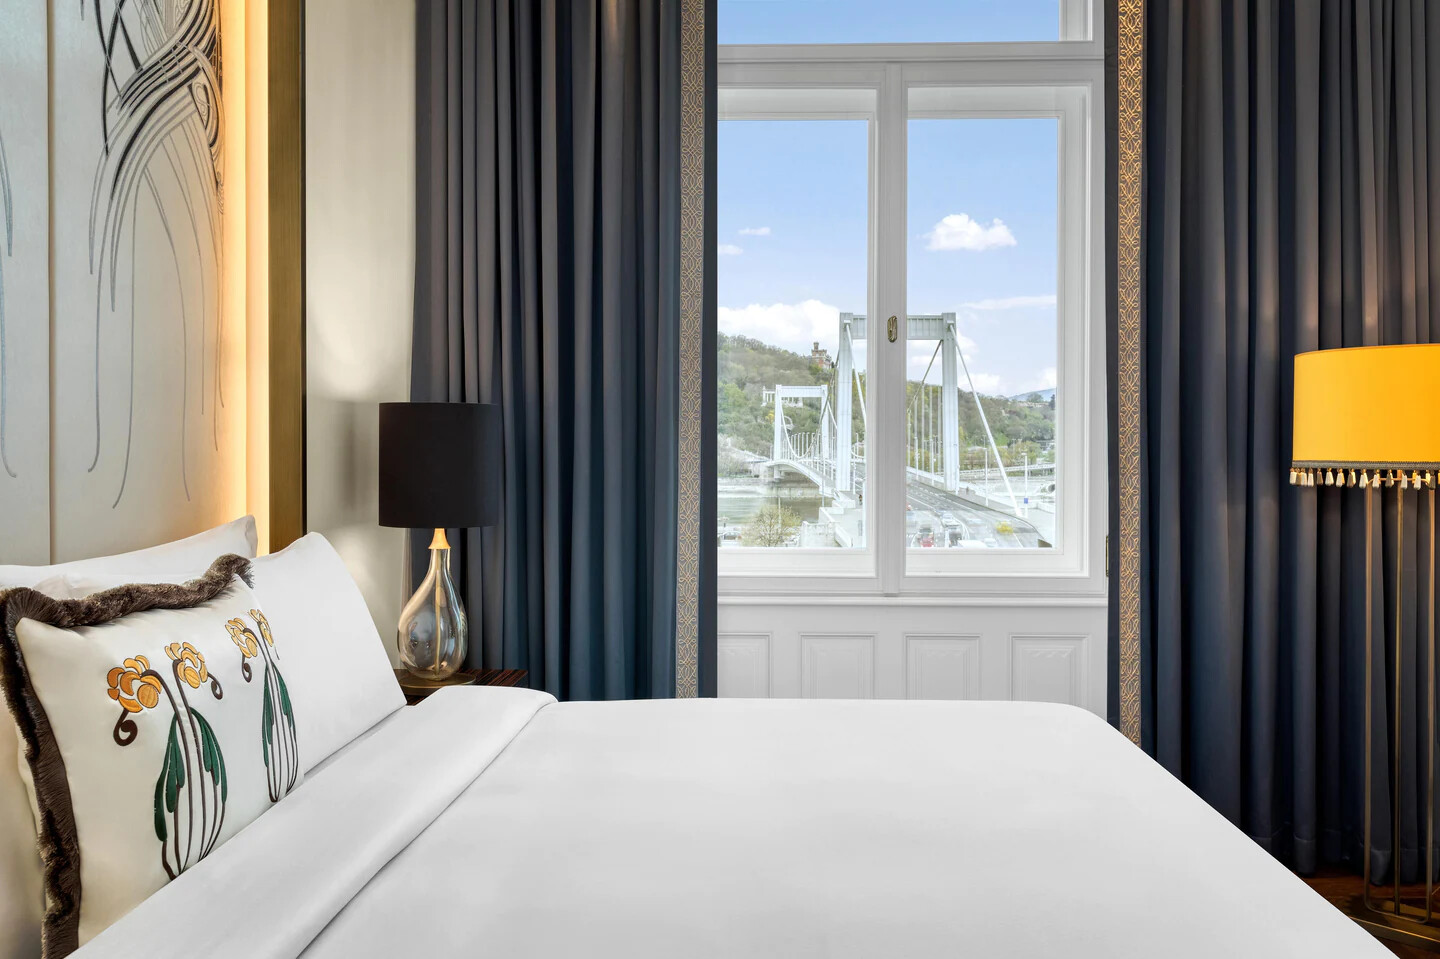 Matild Palace Hotel-Budapest-King Room with Danube view